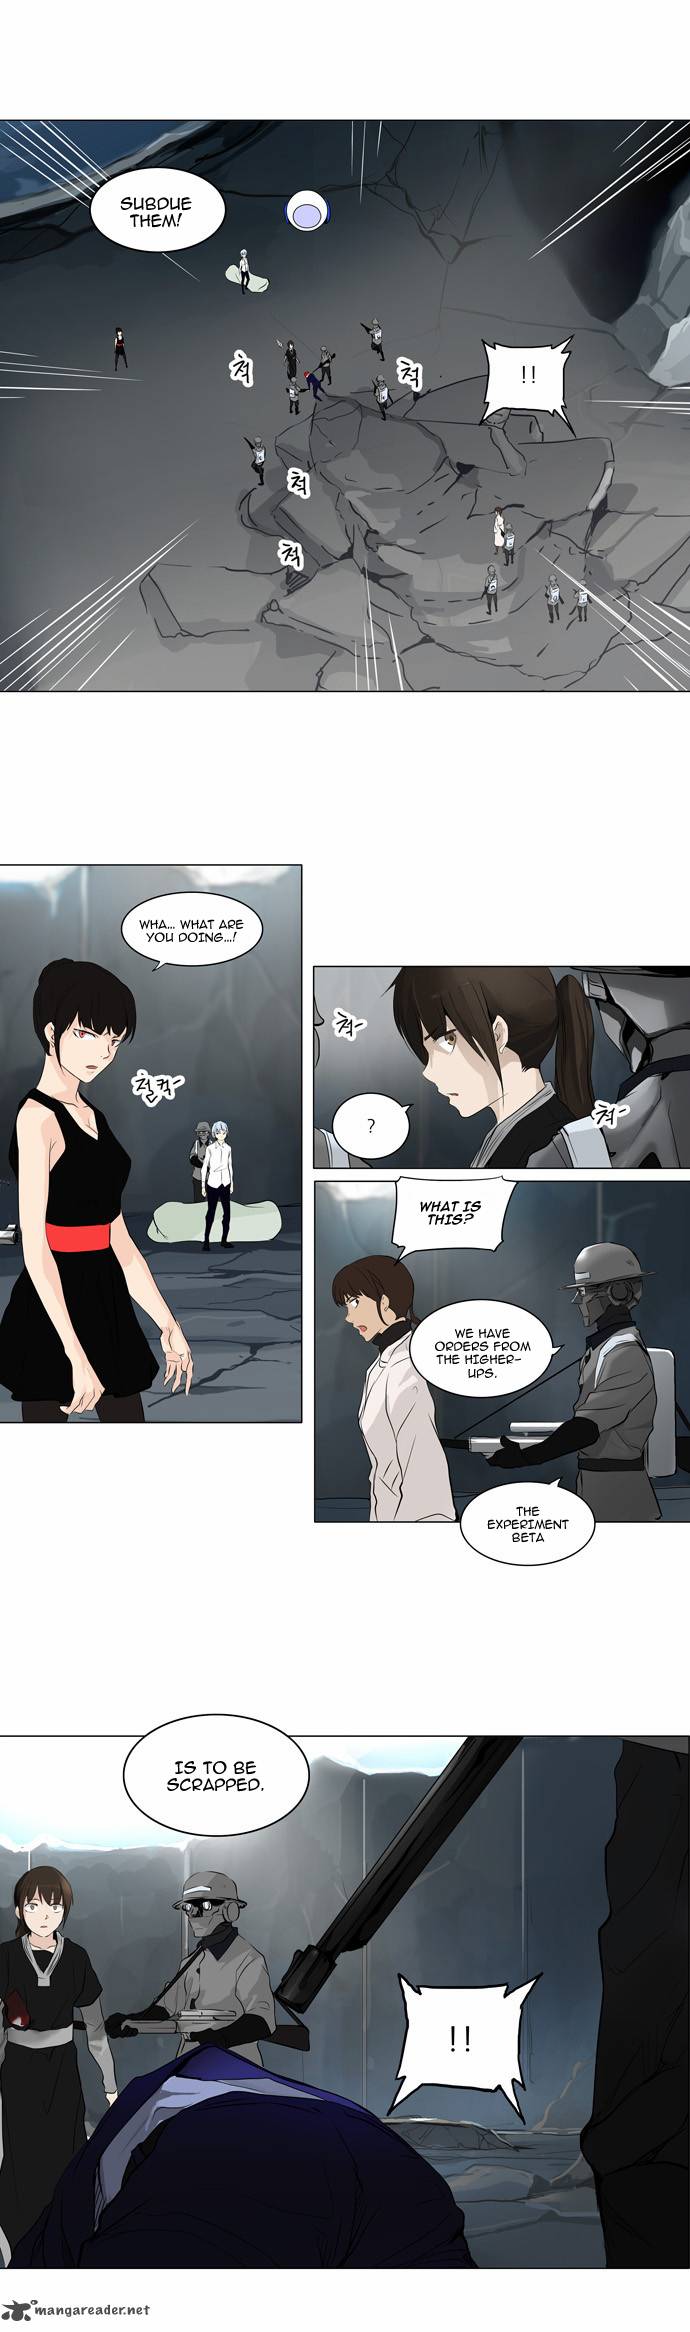 Tower Of God 176 13